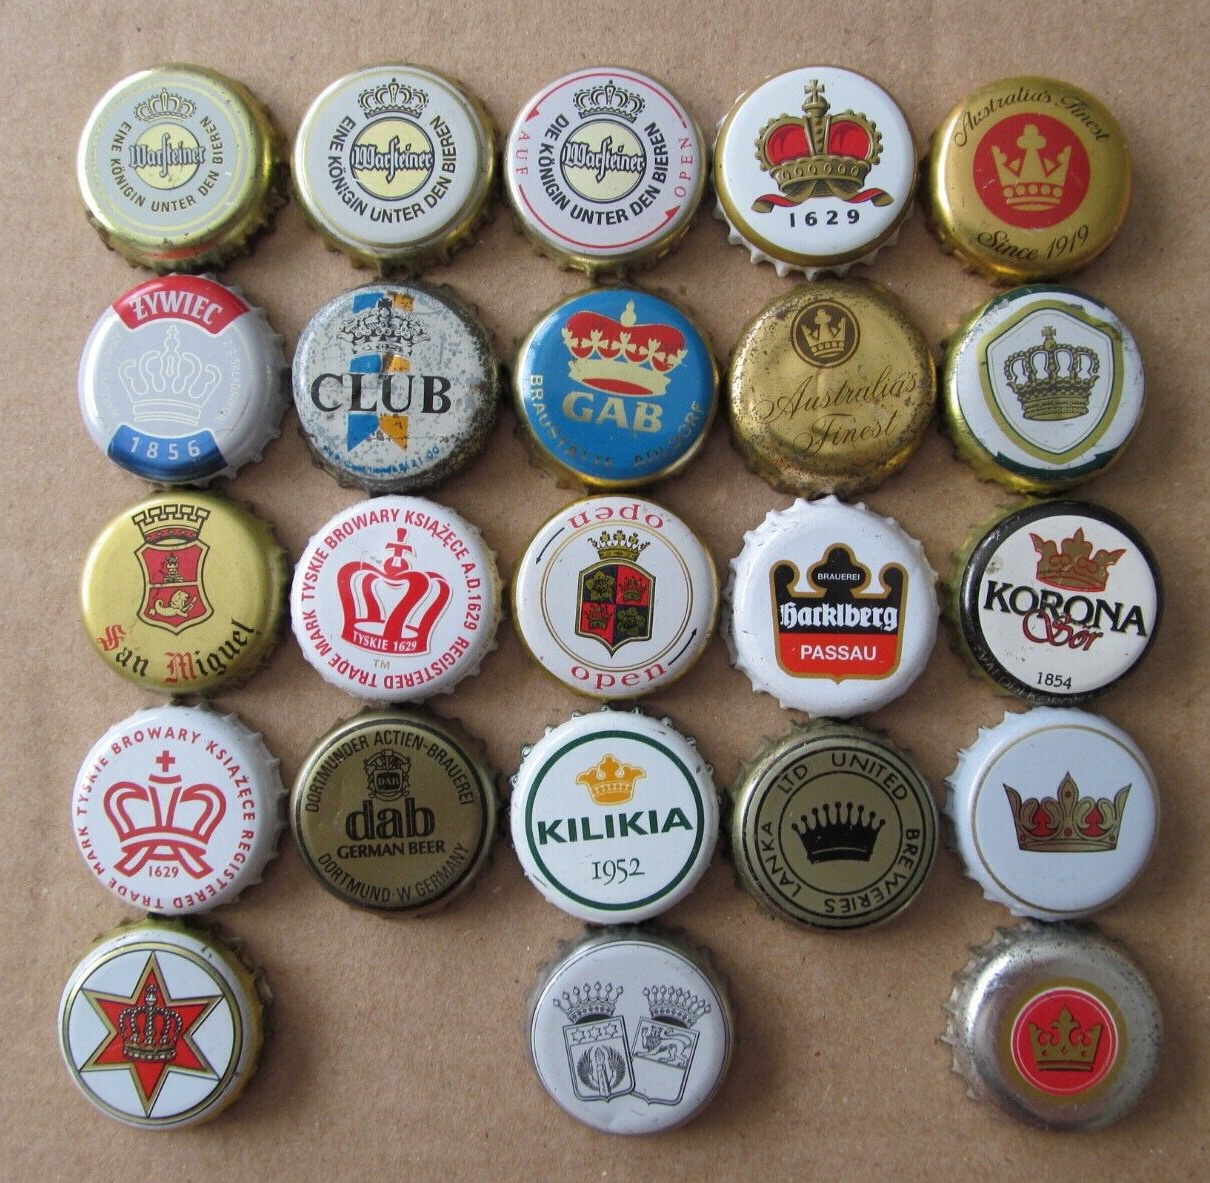 23 DIF MIXED WORLDWIDE CAPS WITH CROWNS MOST OBSOLETE BEER BOTTLE CAPS